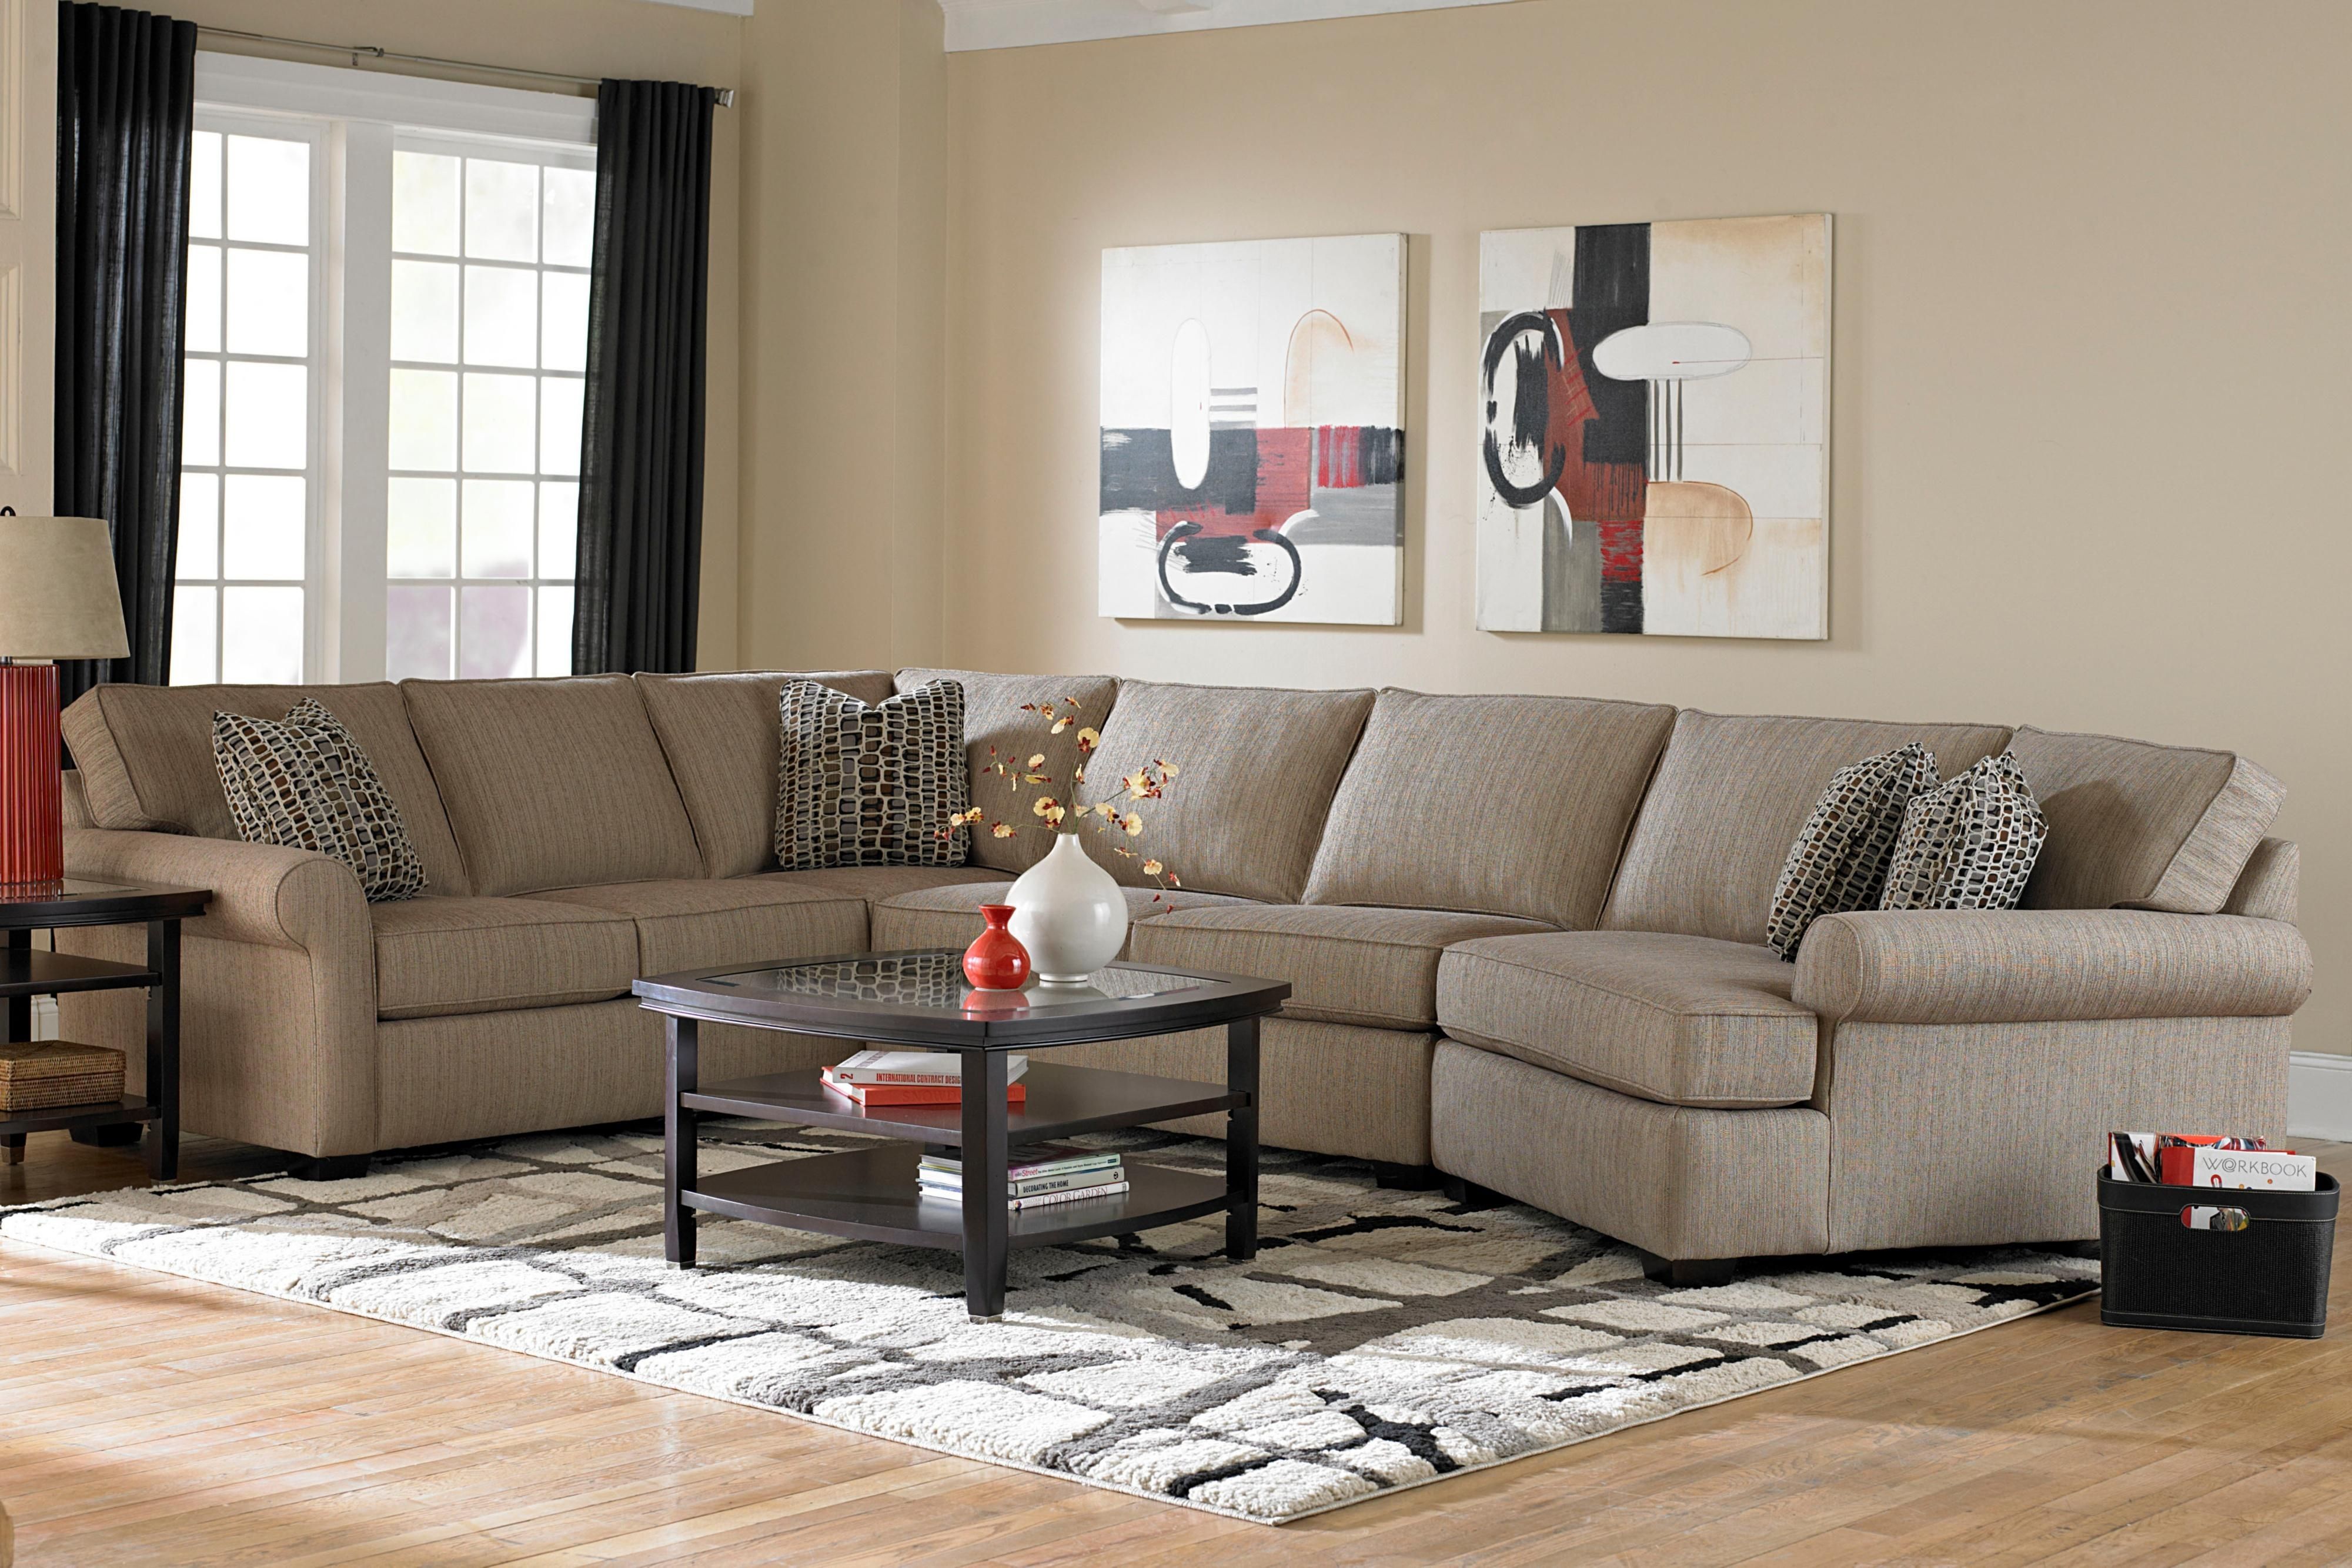 Broyhill Furniture Ethan Transitional Sectional Sofa With Right In Lancaster Pa Sectional Sofas (View 3 of 10)